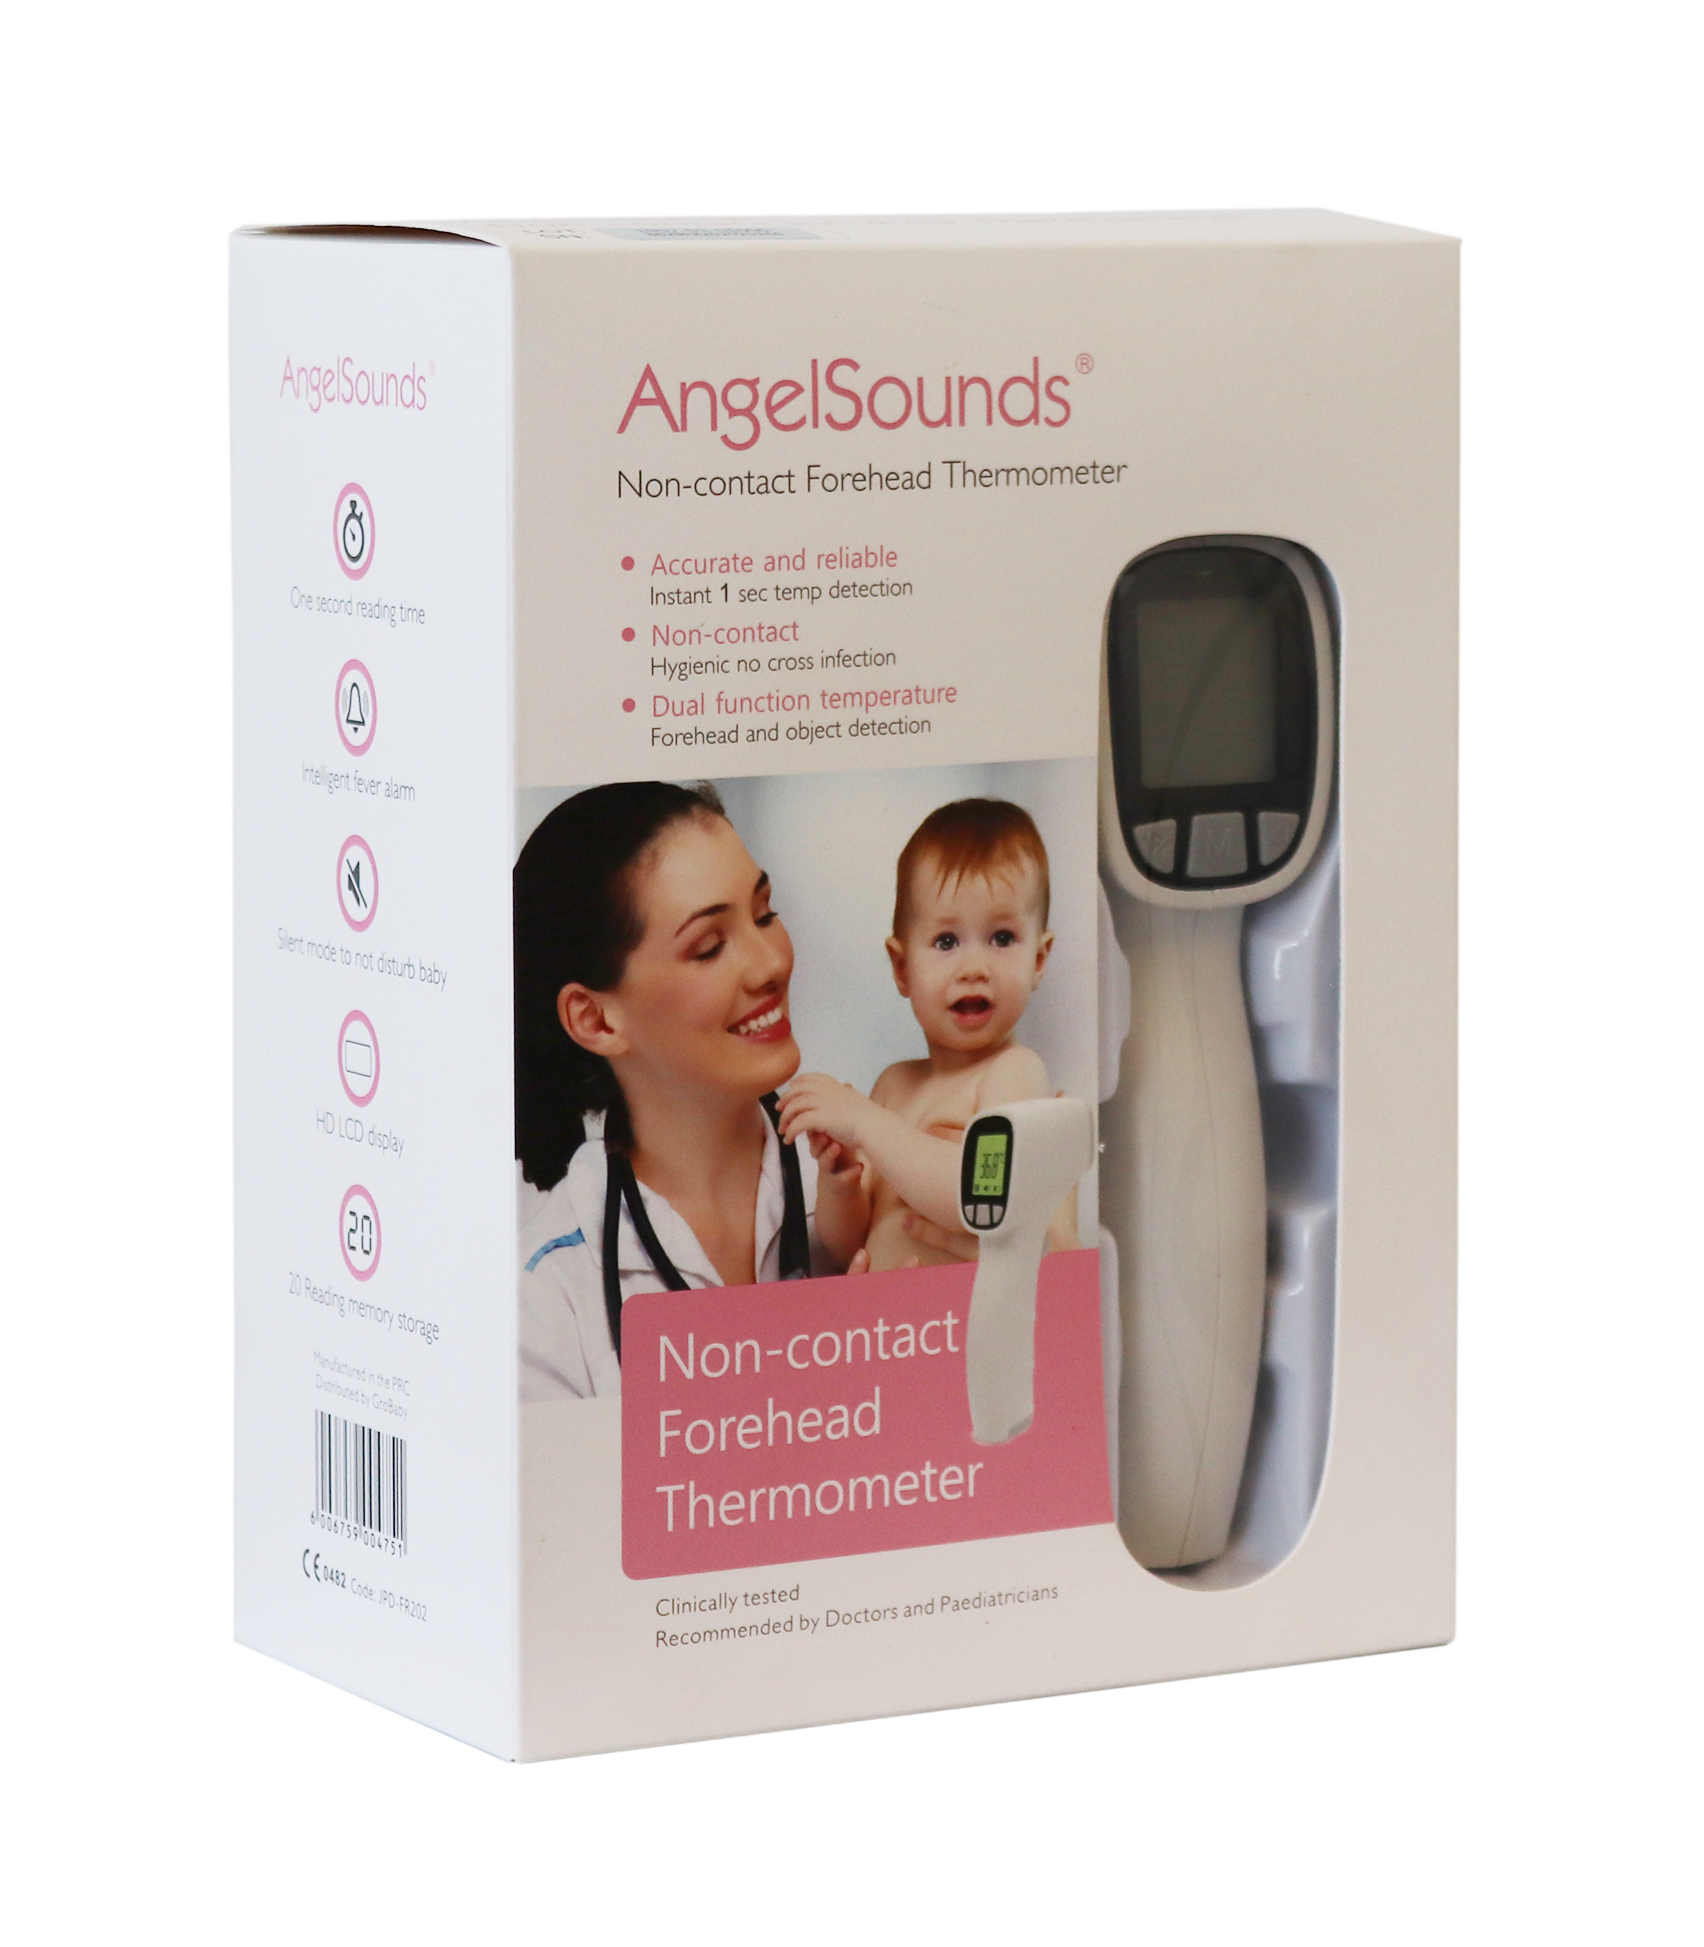 ANGEL SOUNDS – NON-CONTACT FOREHEAD THERMOMETER